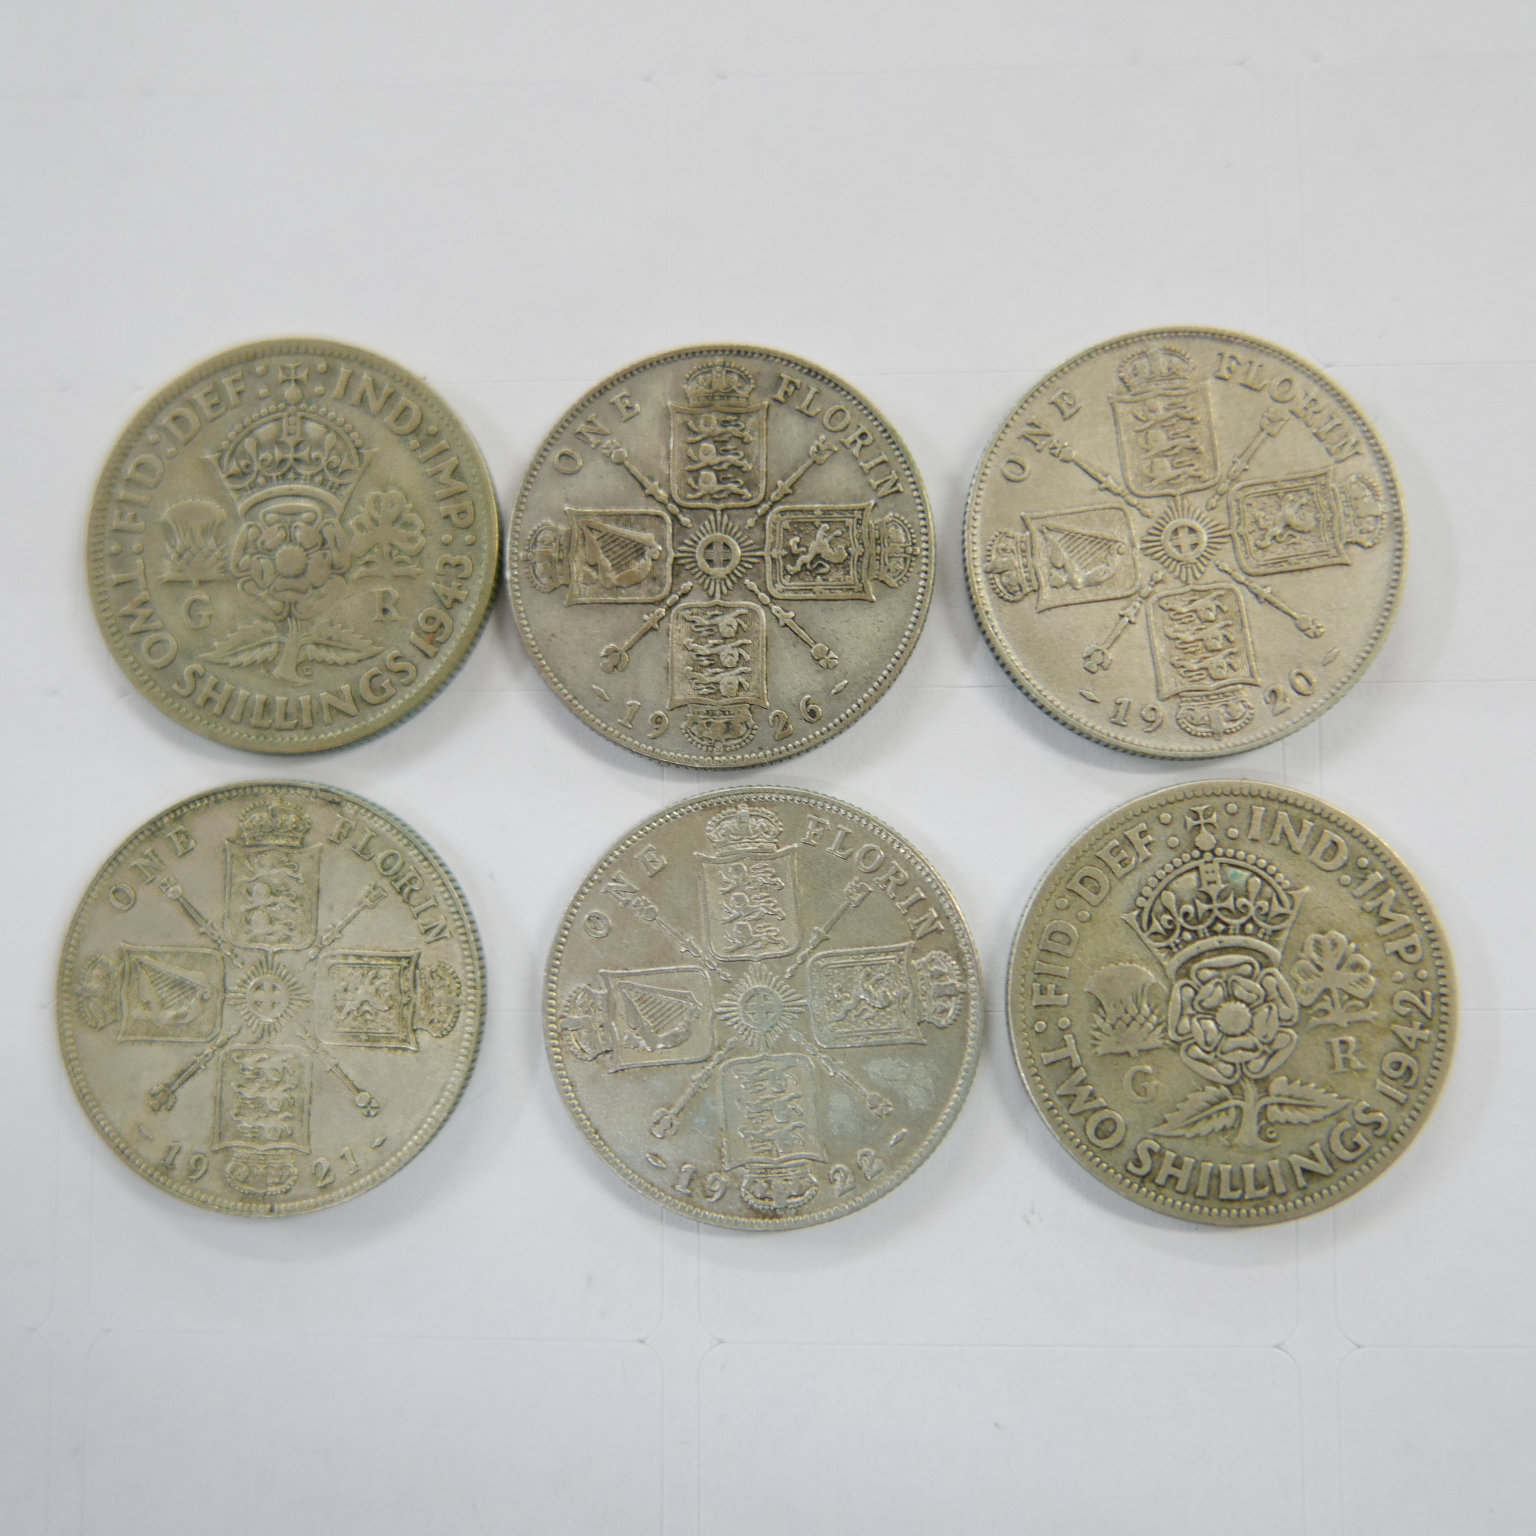 Six florins/two shillings coins, 1920, 1921, 1922, 1926, 1942 and 1943 - Image 2 of 2